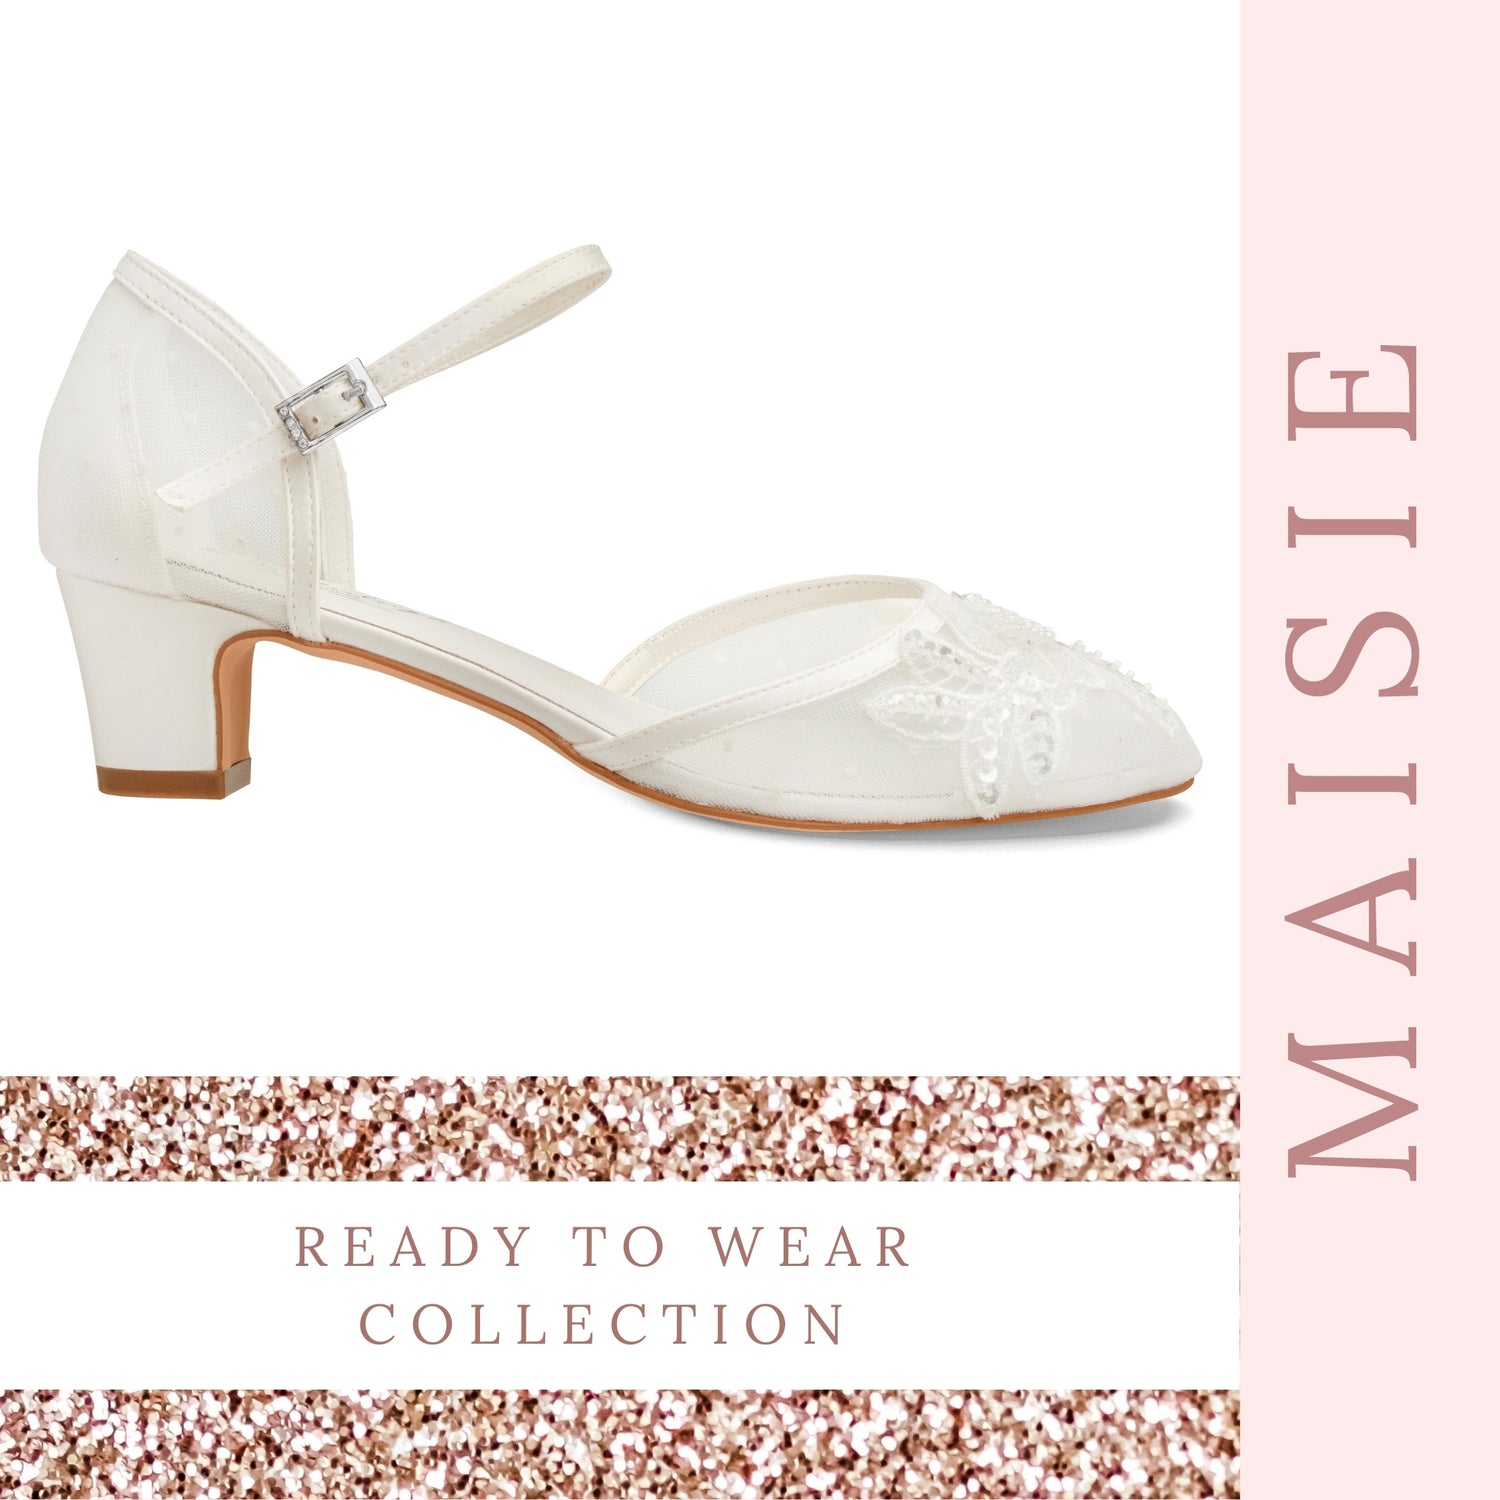 mother-of-the-bride-shoes-low-heel